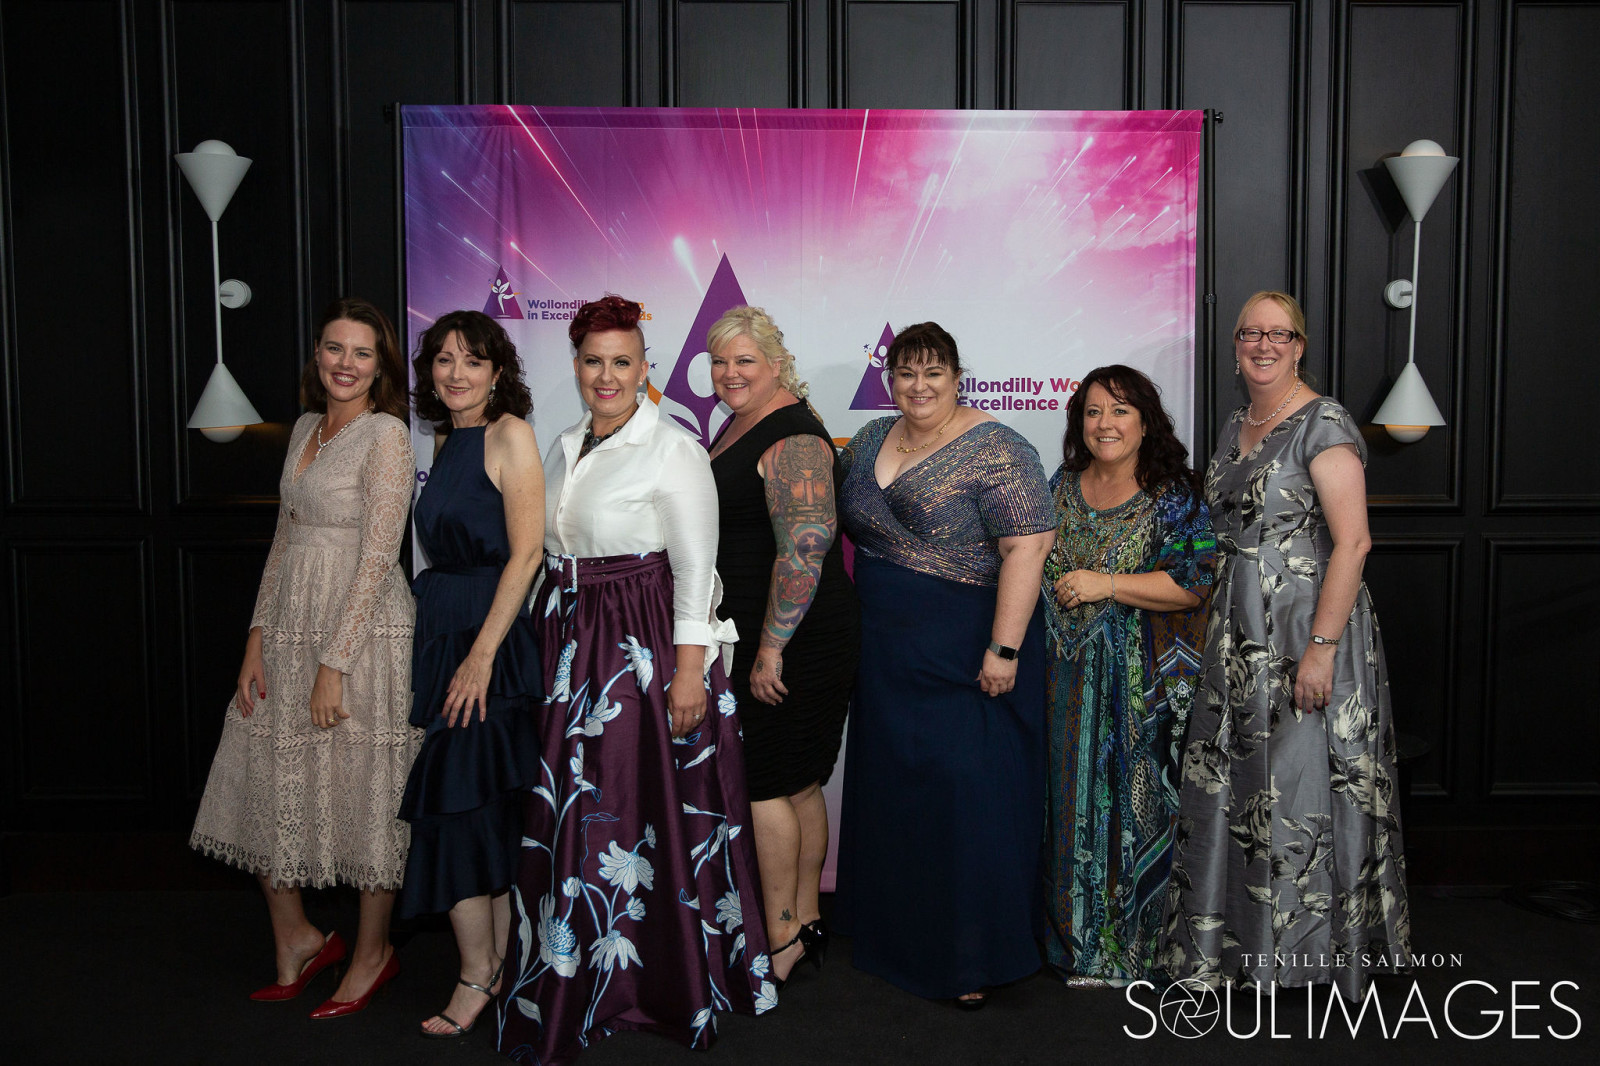 Local ladies at the Wollondilly Women in Excellence Awards